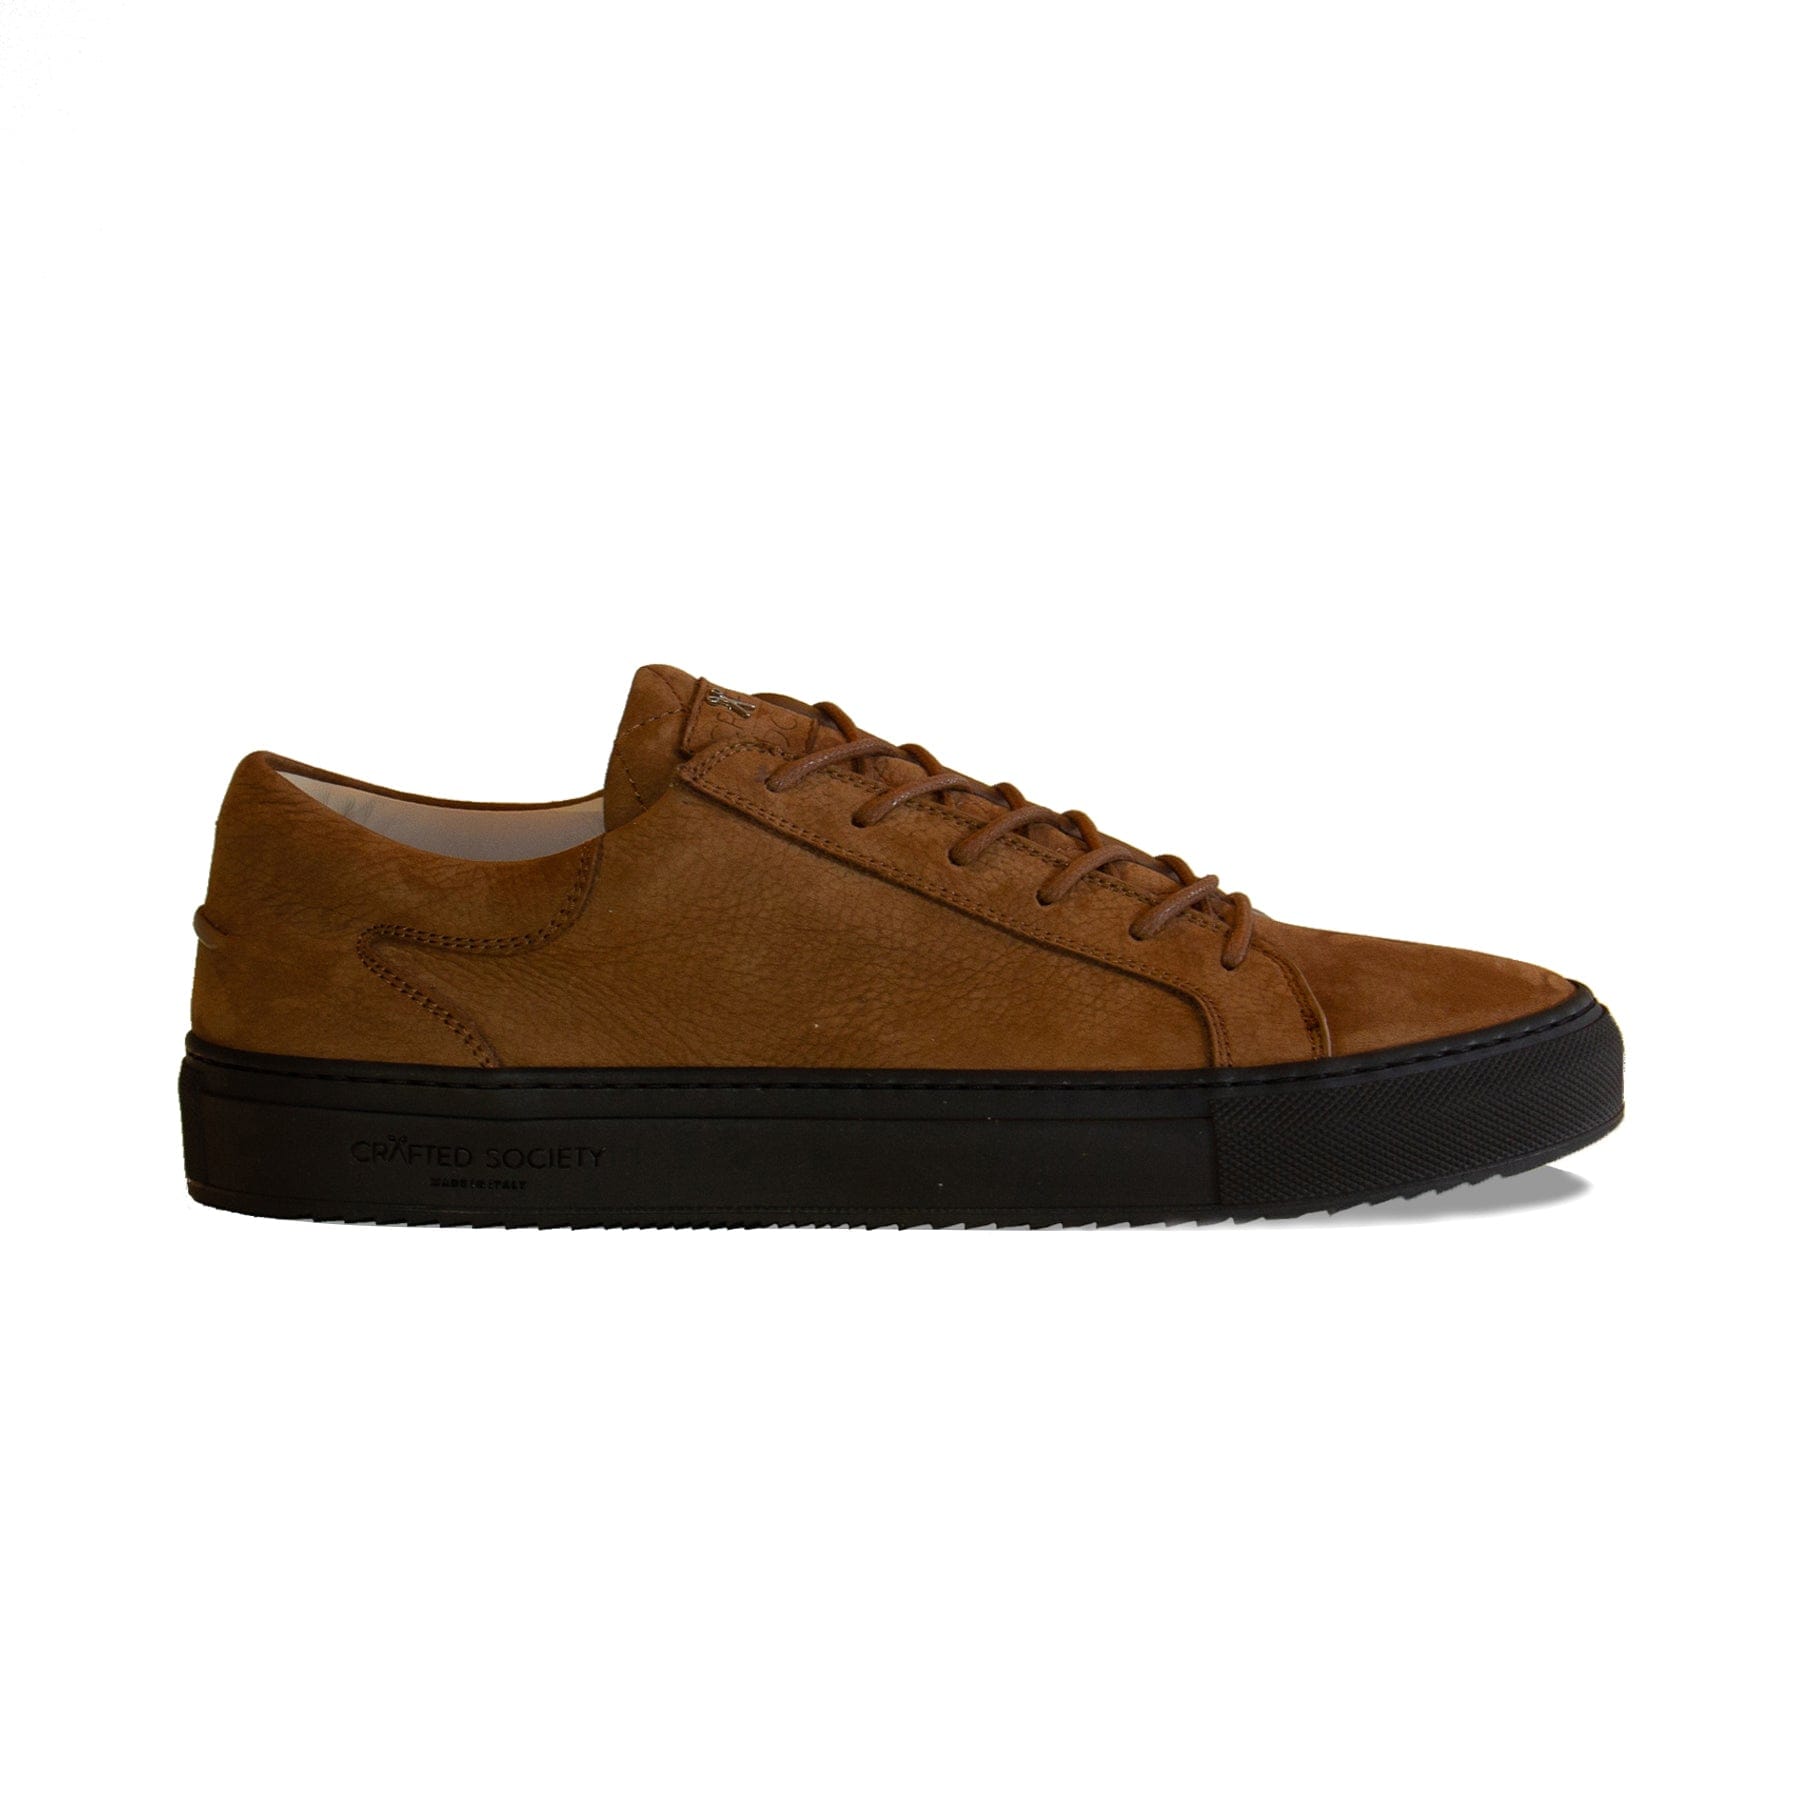 Mario Low Refined Sneaker Cognac Nubuck Chocolate Outsole Sideview